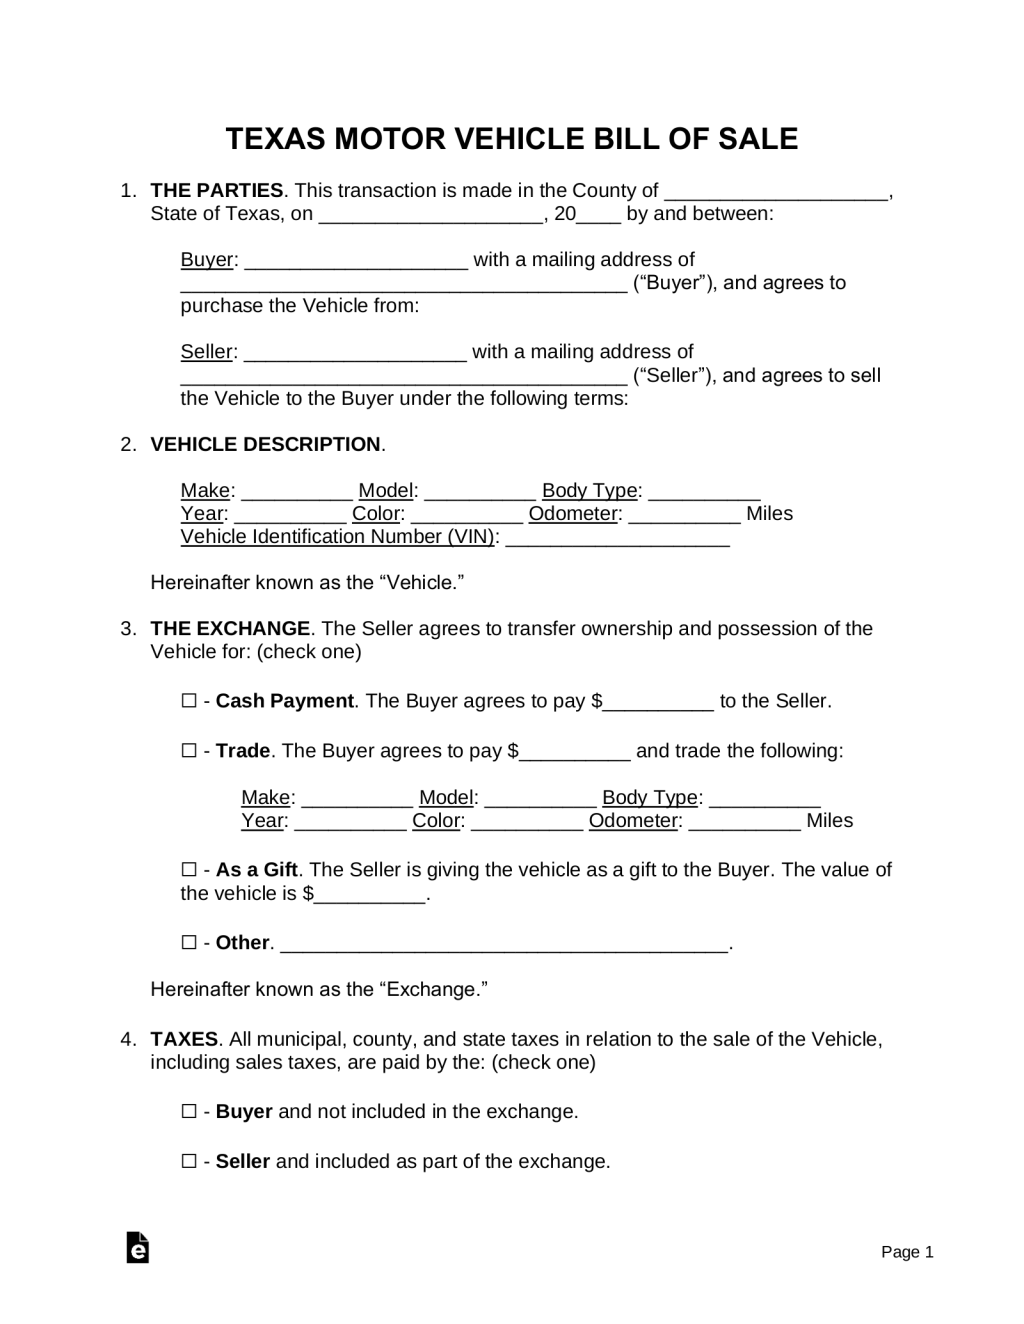 Picture of: Free Texas Motor Vehicle Bill of Sale Form – PDF  Word – eForms